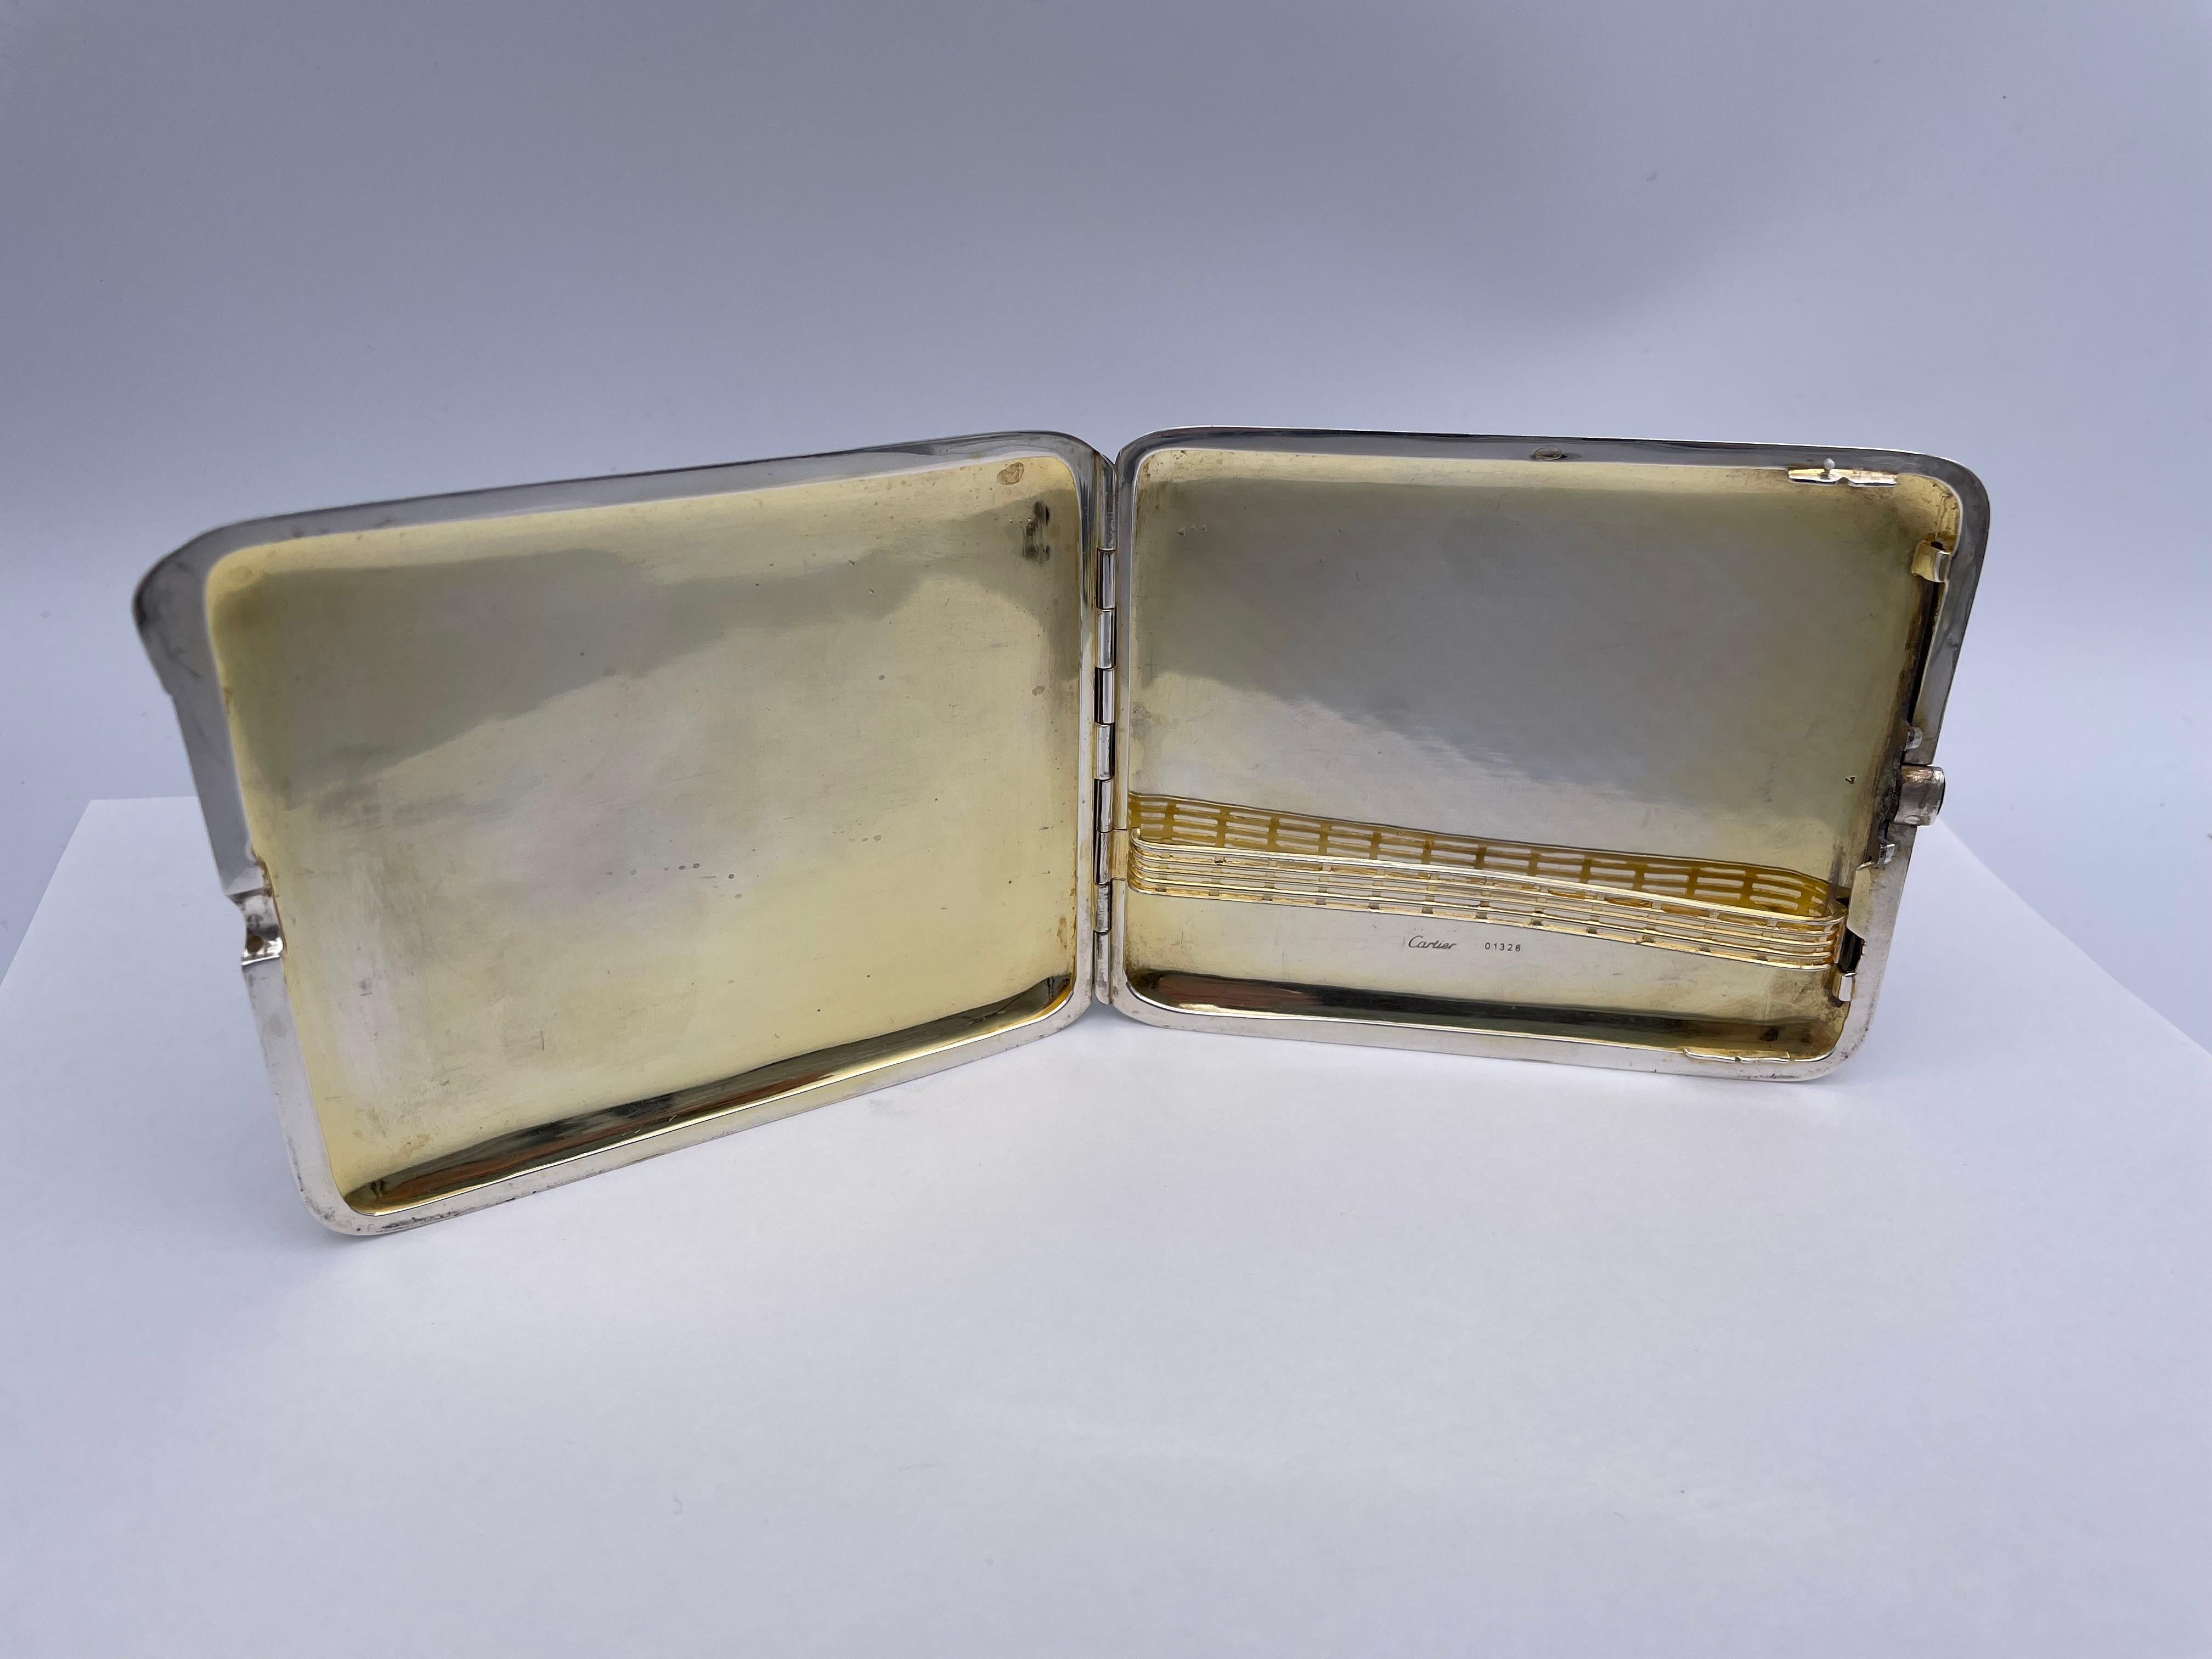 A most handsome art deco hinged case.  Made, signed and numbered by CARTIER.  Heavy gauge sterling silver, embellished by panels of 18K yellow gold.  Allover engraved diamond pattern.  Faceted sapphire set in the clasp.  `3 1/4